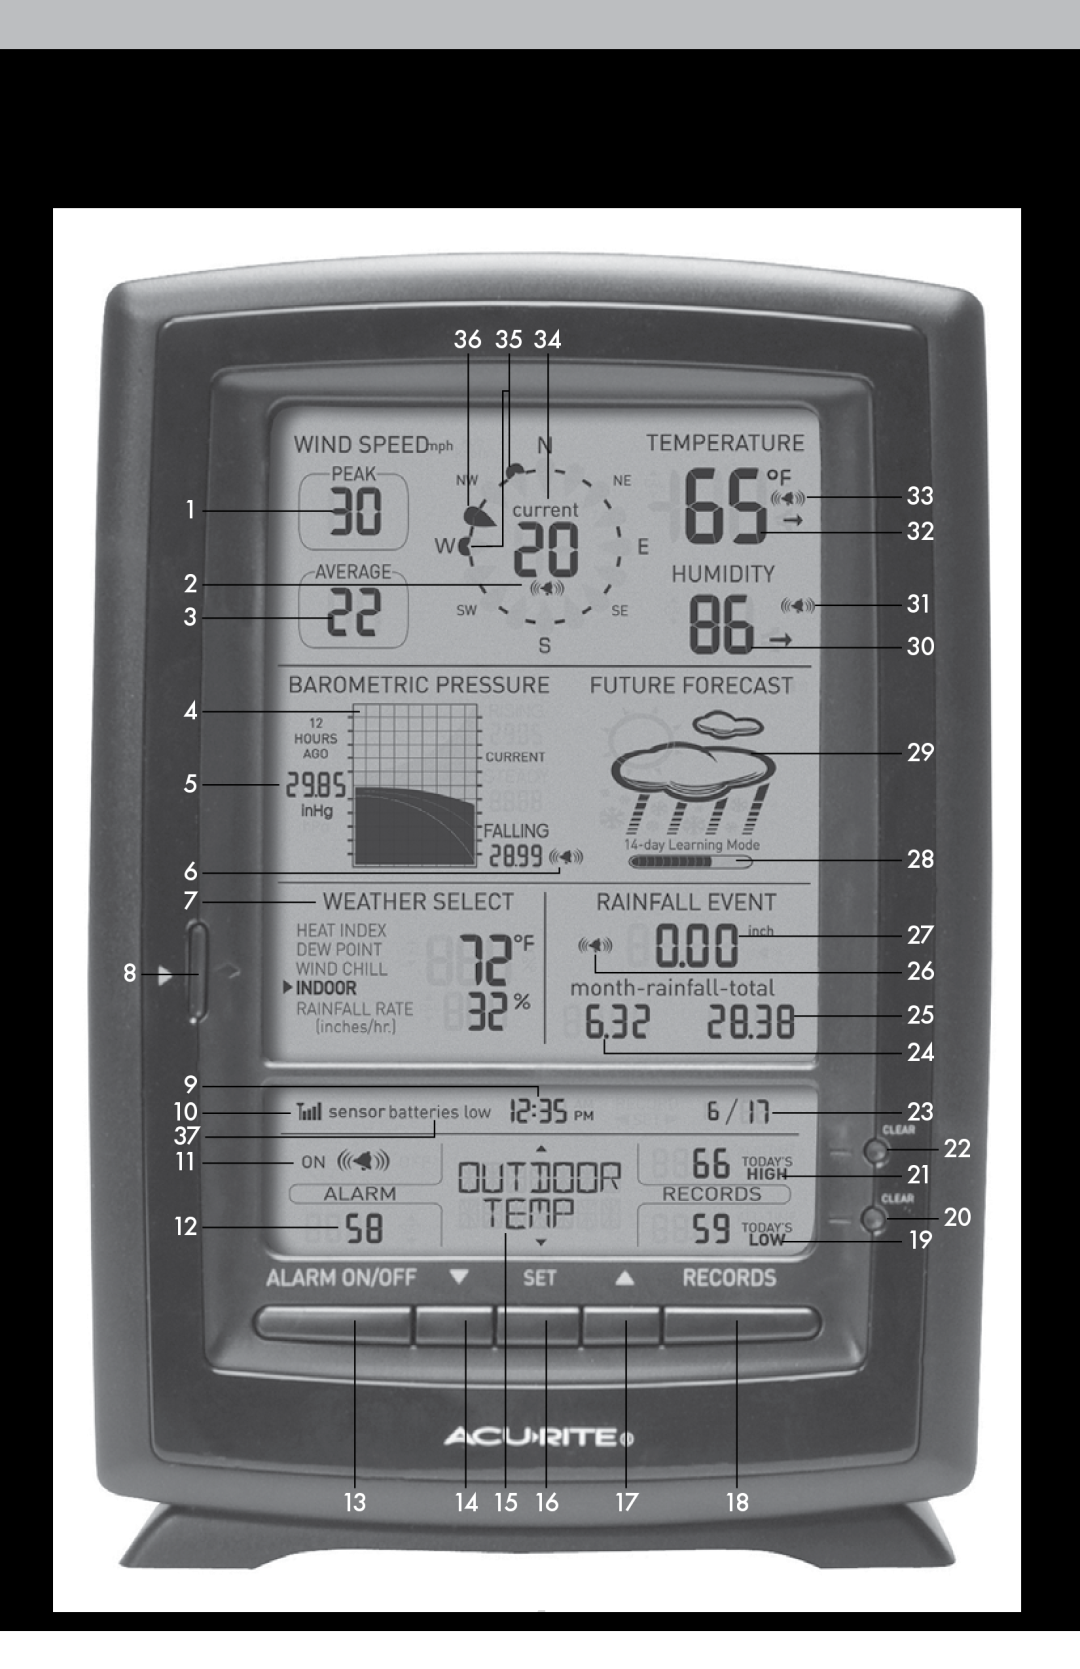 Acu-Rite 1010 instruction manual Display Unit, Features & Benefits, 36 35, 1 2 3 4 5 6 7 8 9, 33 32 31 30 29 28 27 25 